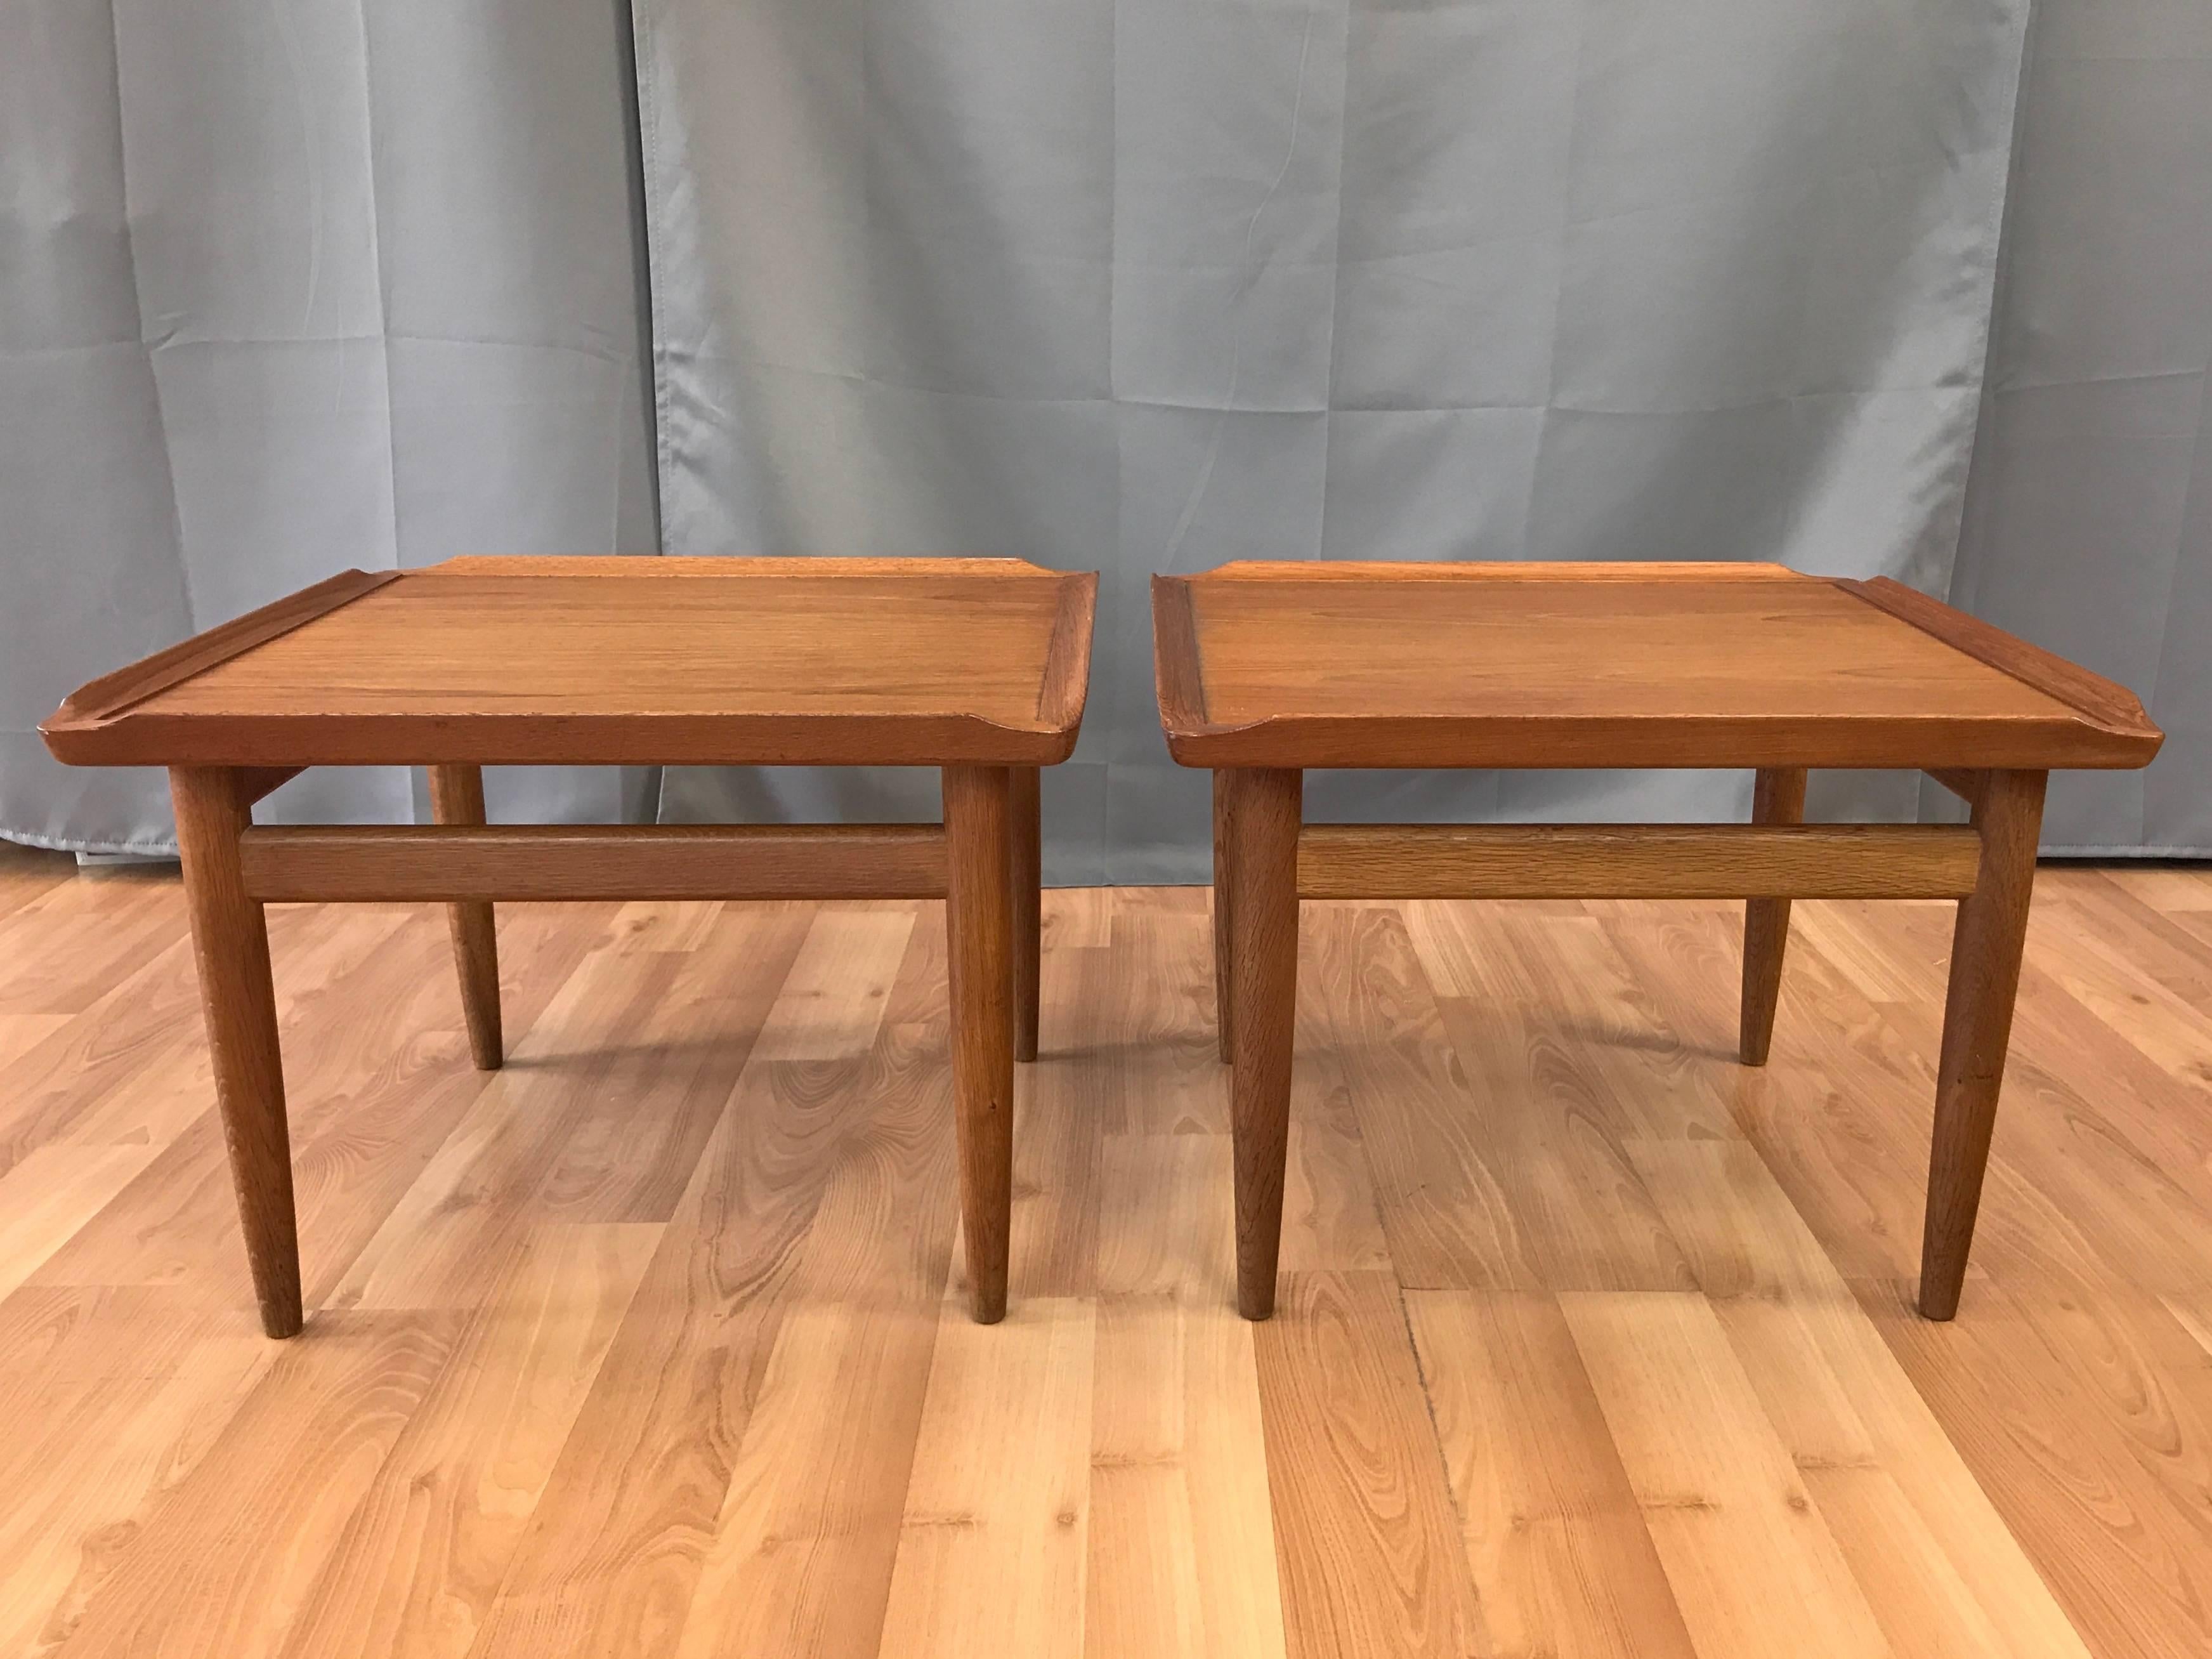 A rare pair of 1950s Danish teak and oak side or end tables by Kurt Østervig for Jason Møbler.

Square teak top with handsomely figured bookmatched grain framed by a smoothly sculpted solid teak angled lip. On solid oak base and legs that have a